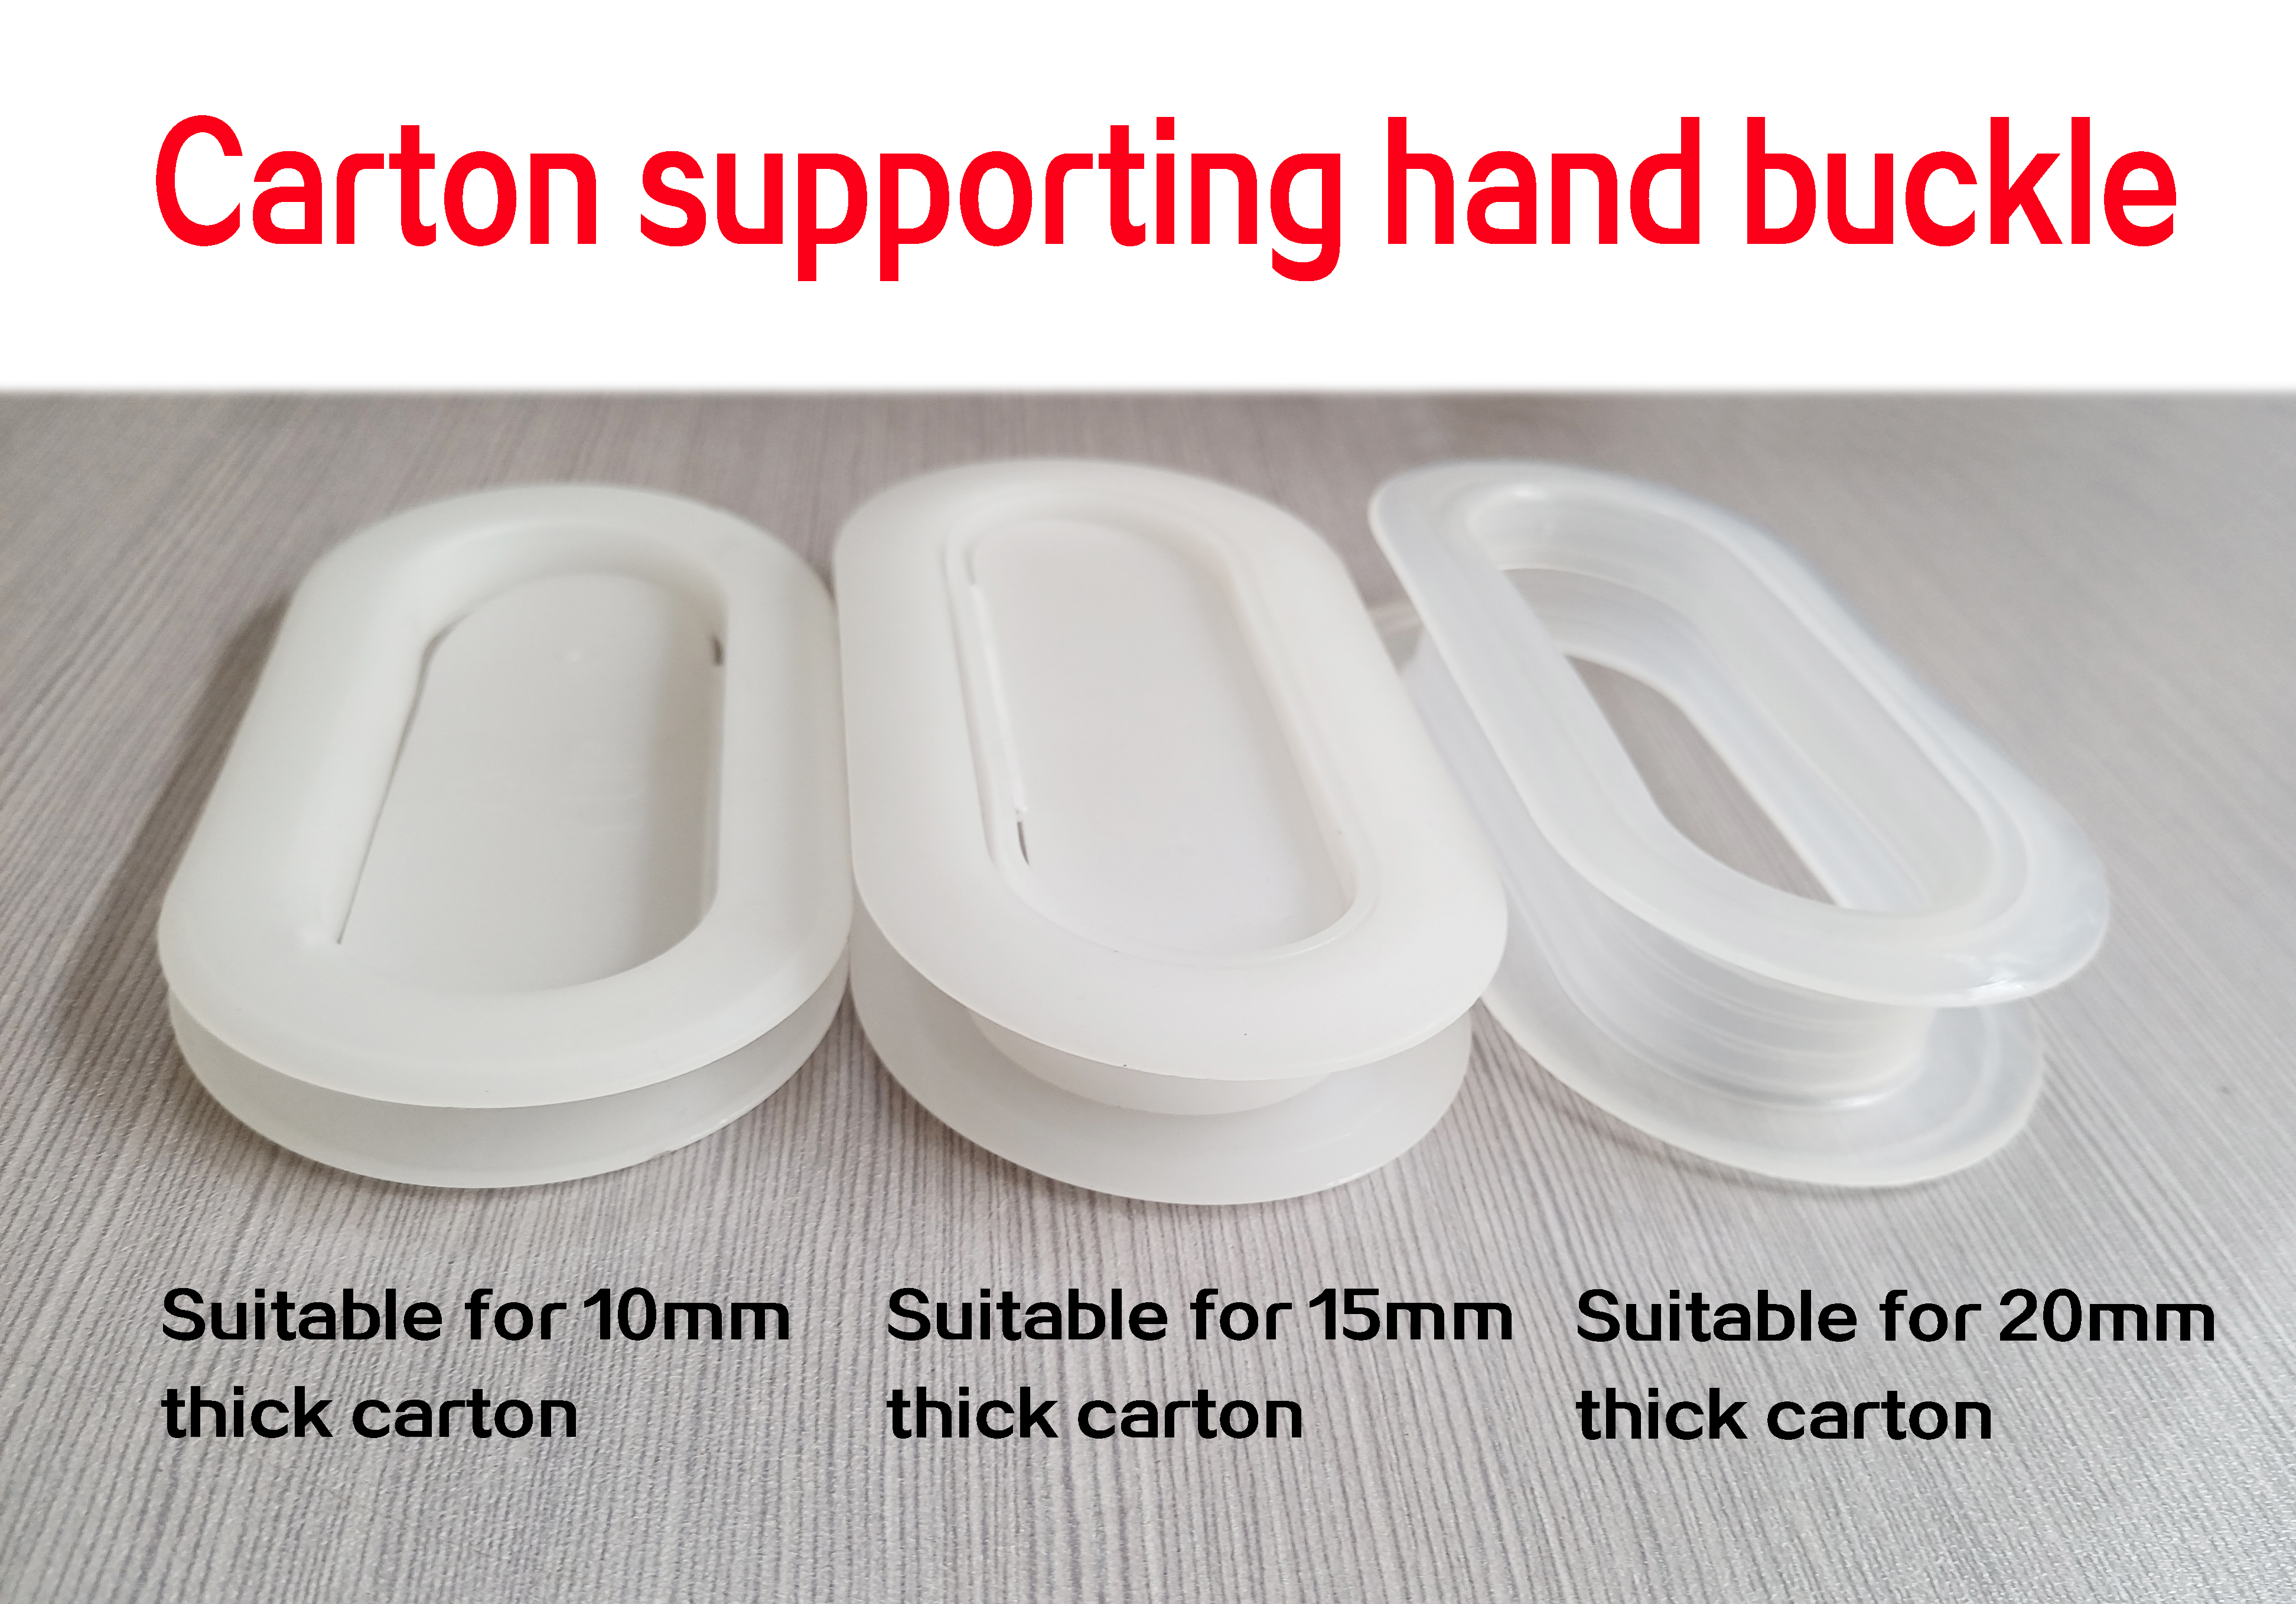 Carton supporting hand buckle